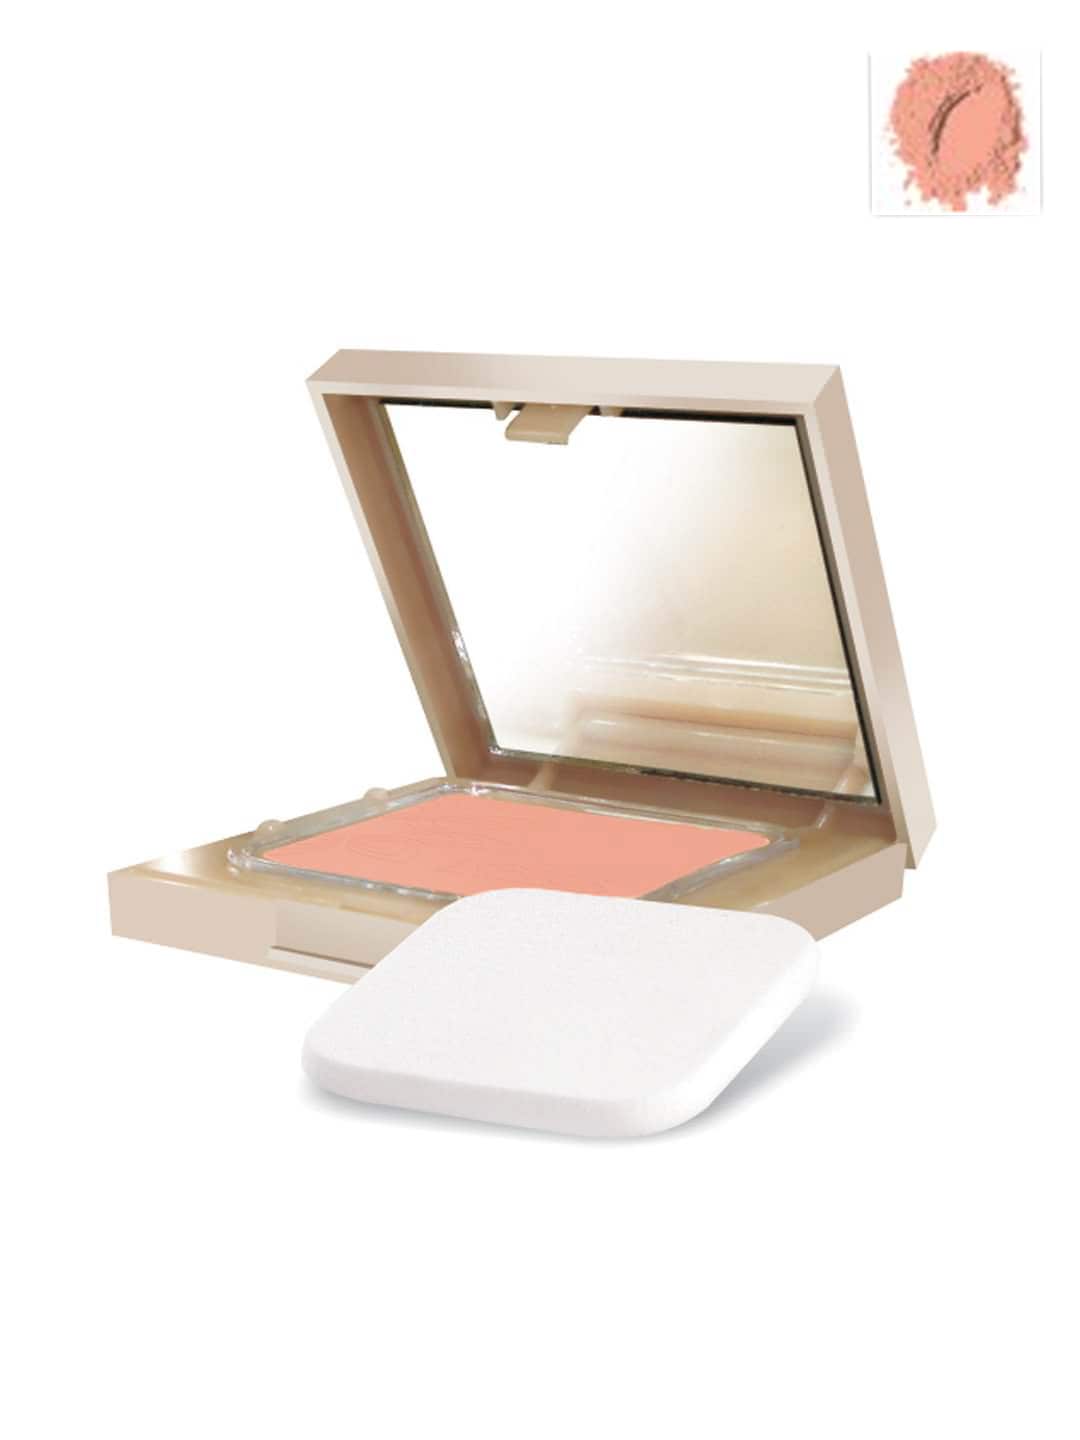 Lotus Herbals Pure Radiance Caramel Compact 575